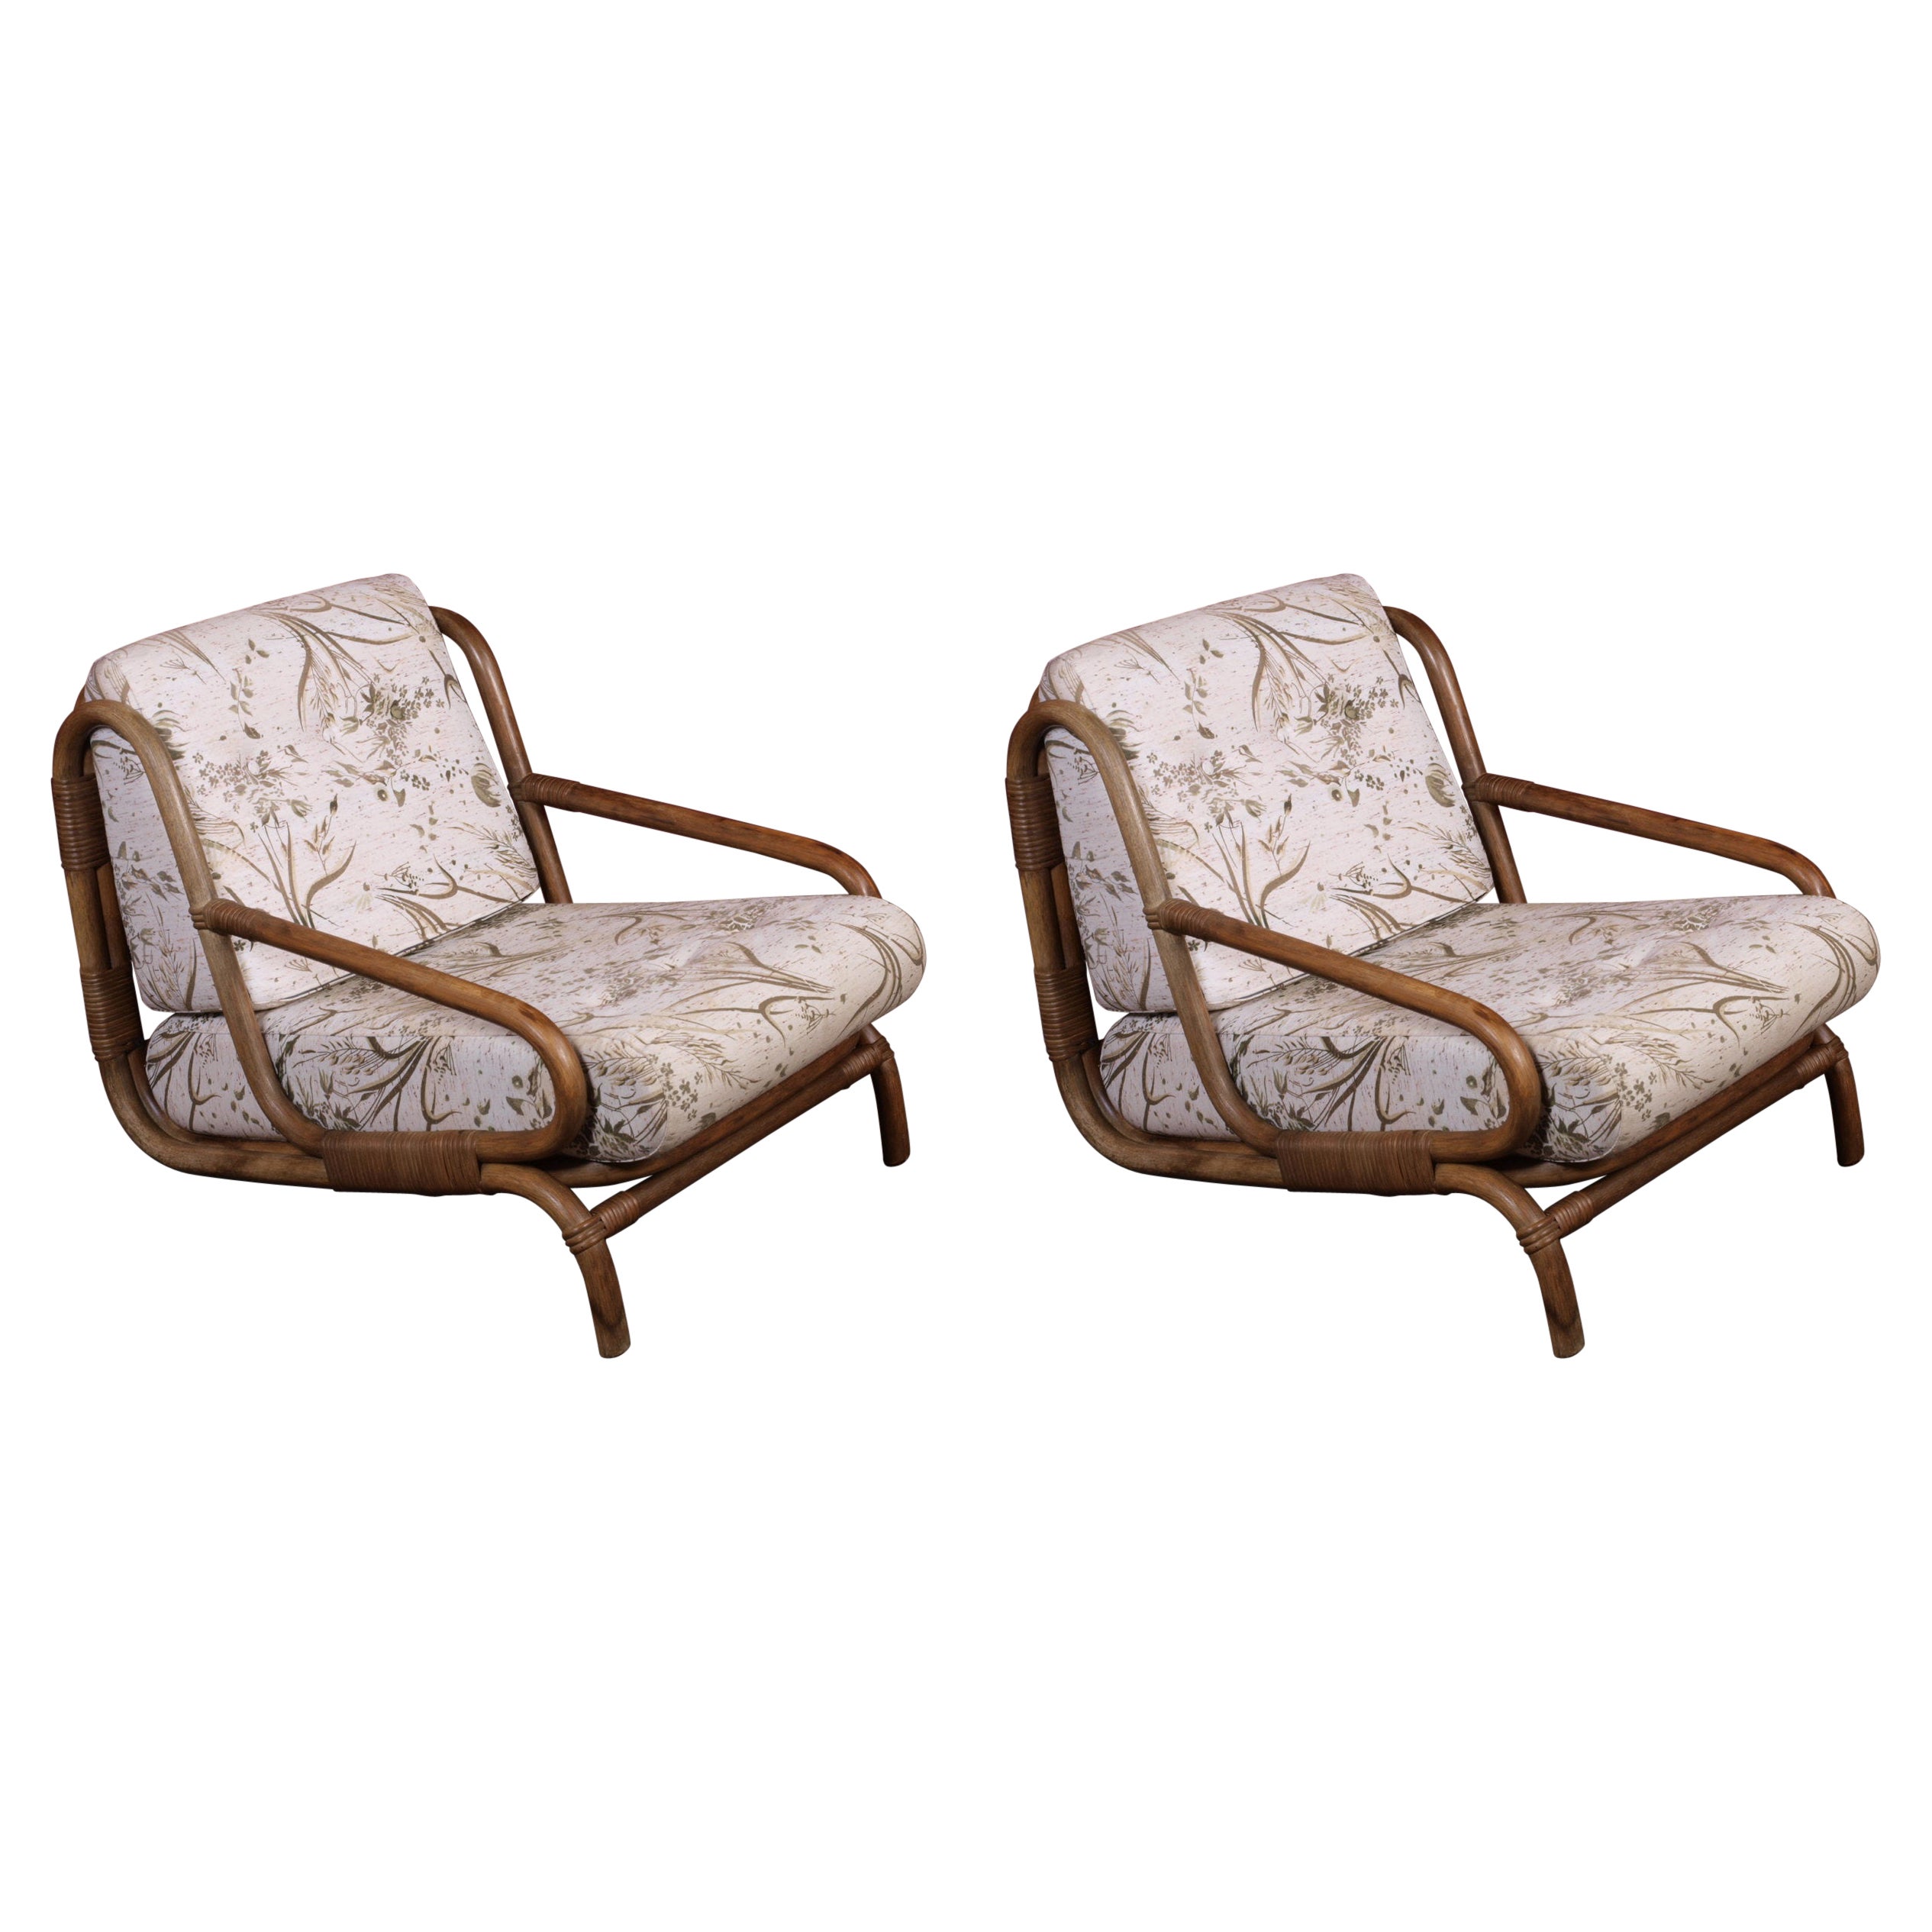 Rare Bamboo Vintage Danish Lounge Chairs, set of 2 For Sale